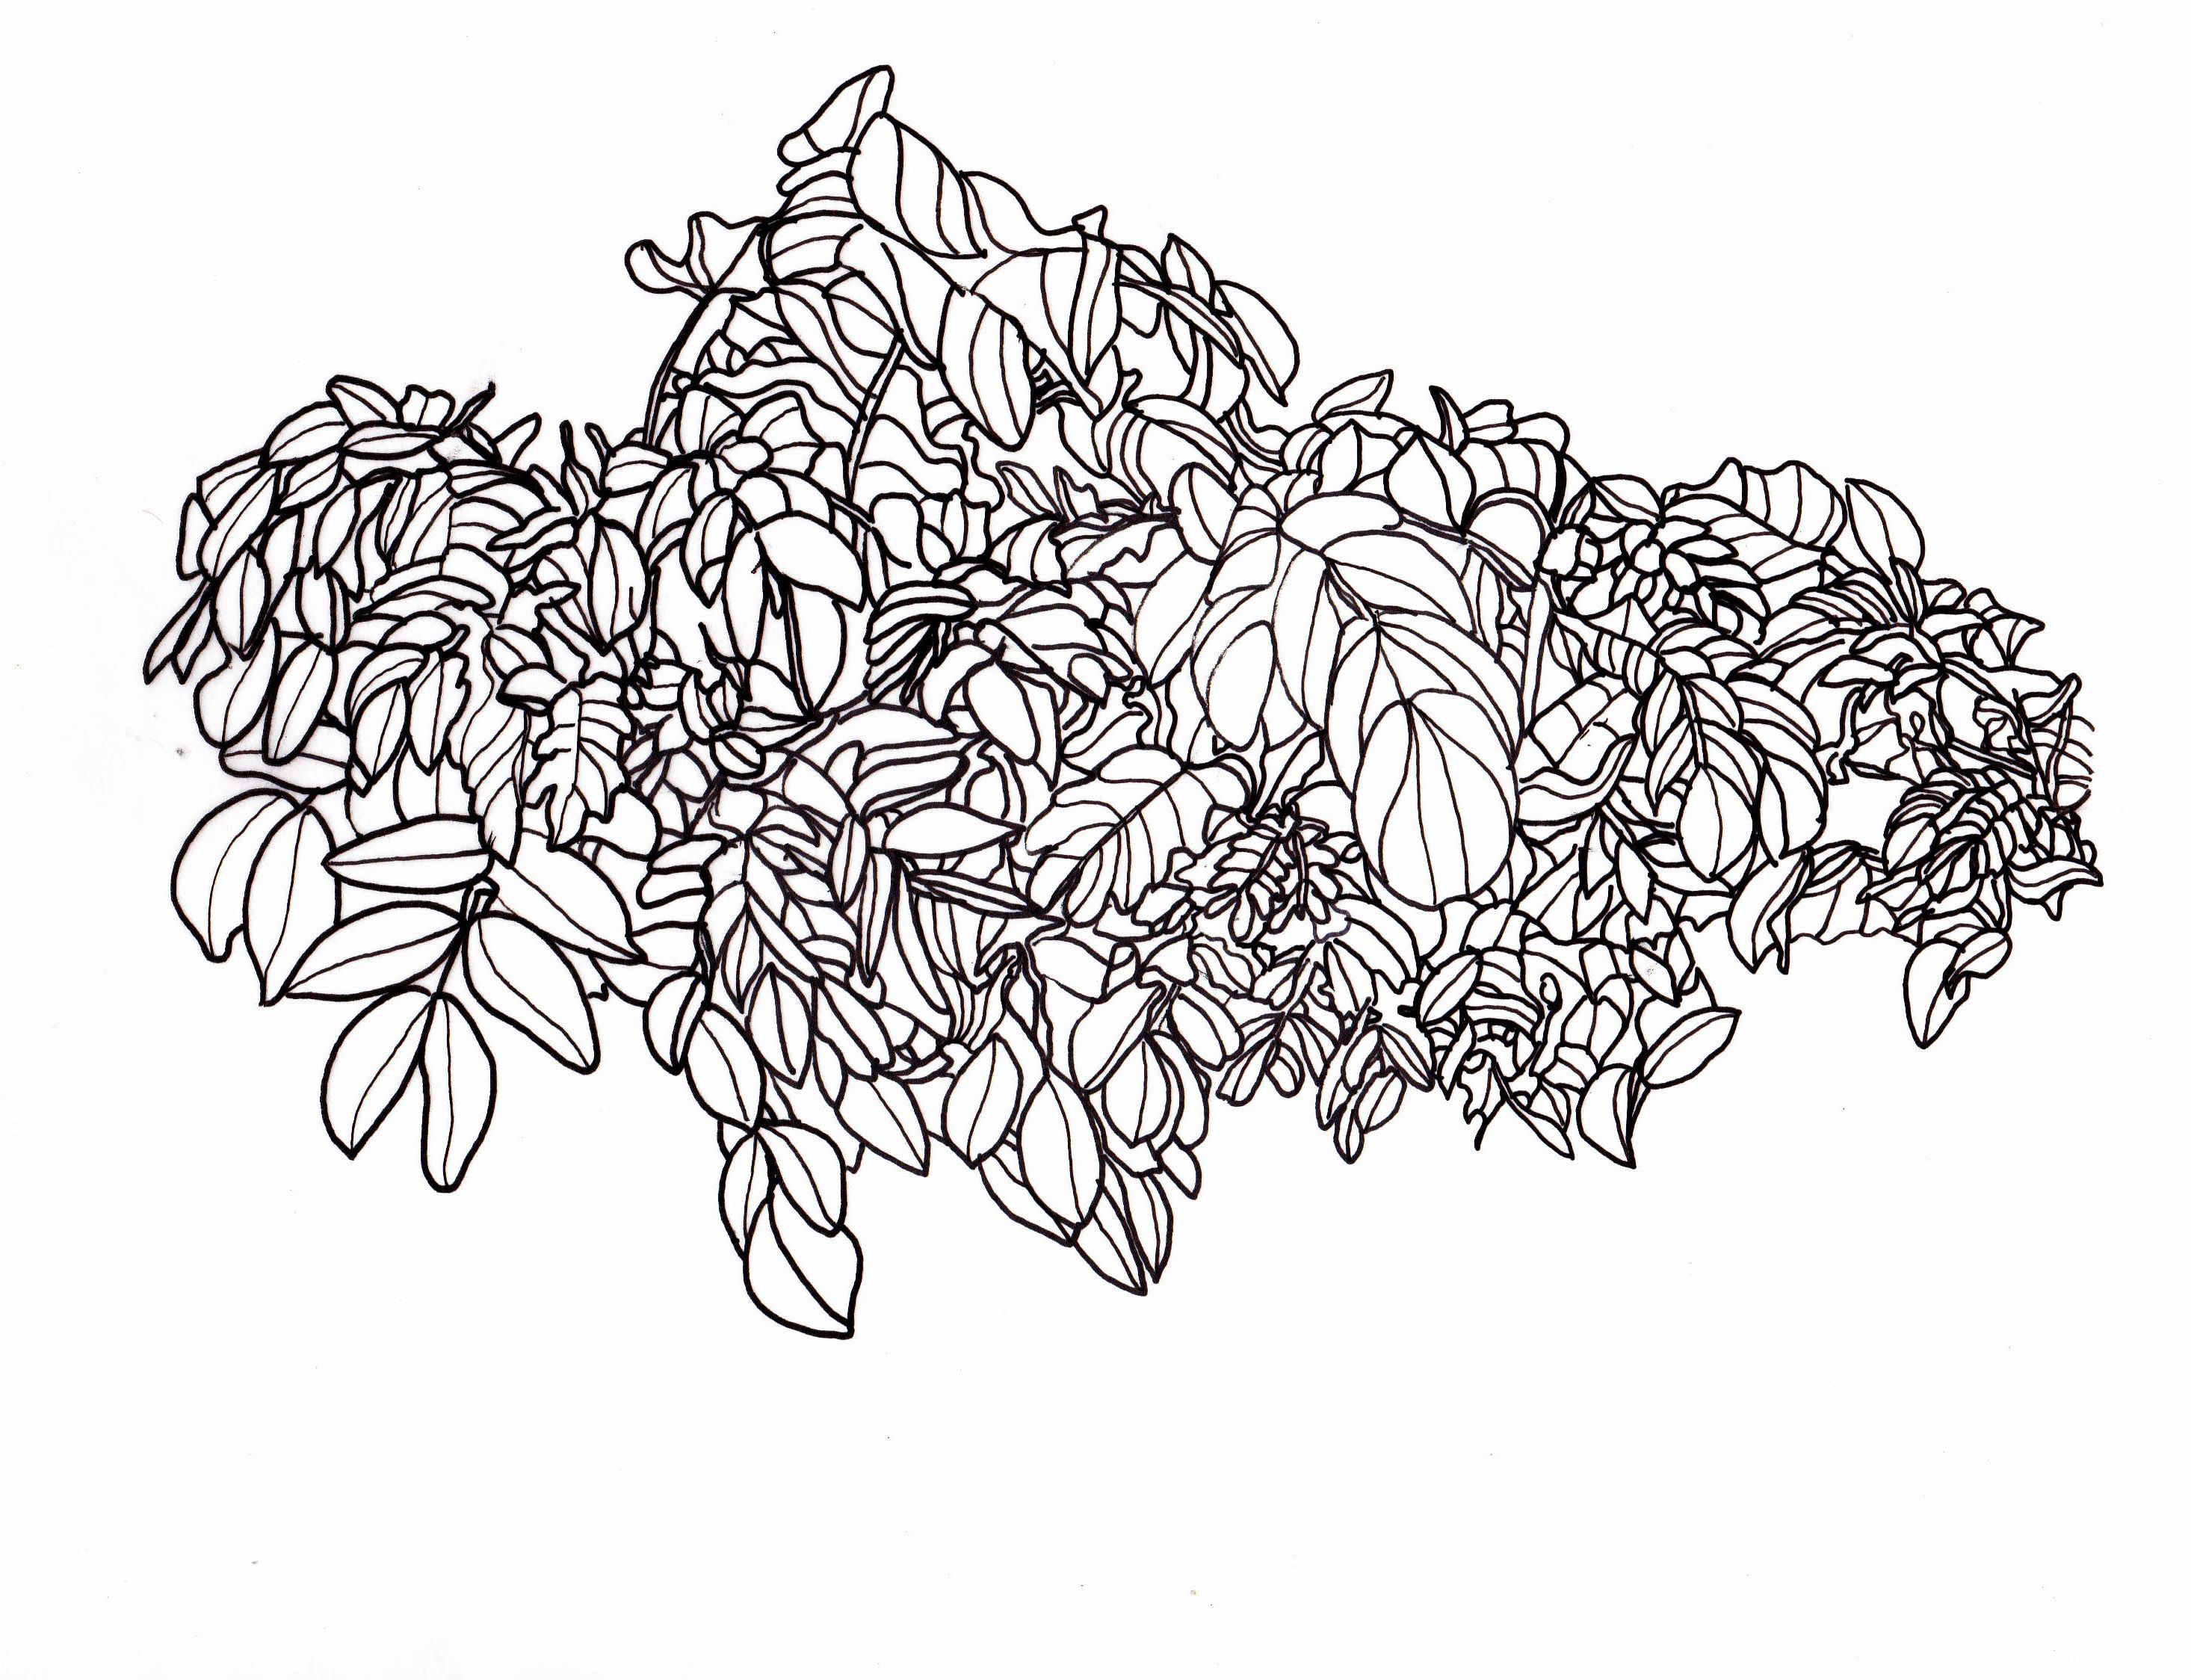 bushes clipart line drawing